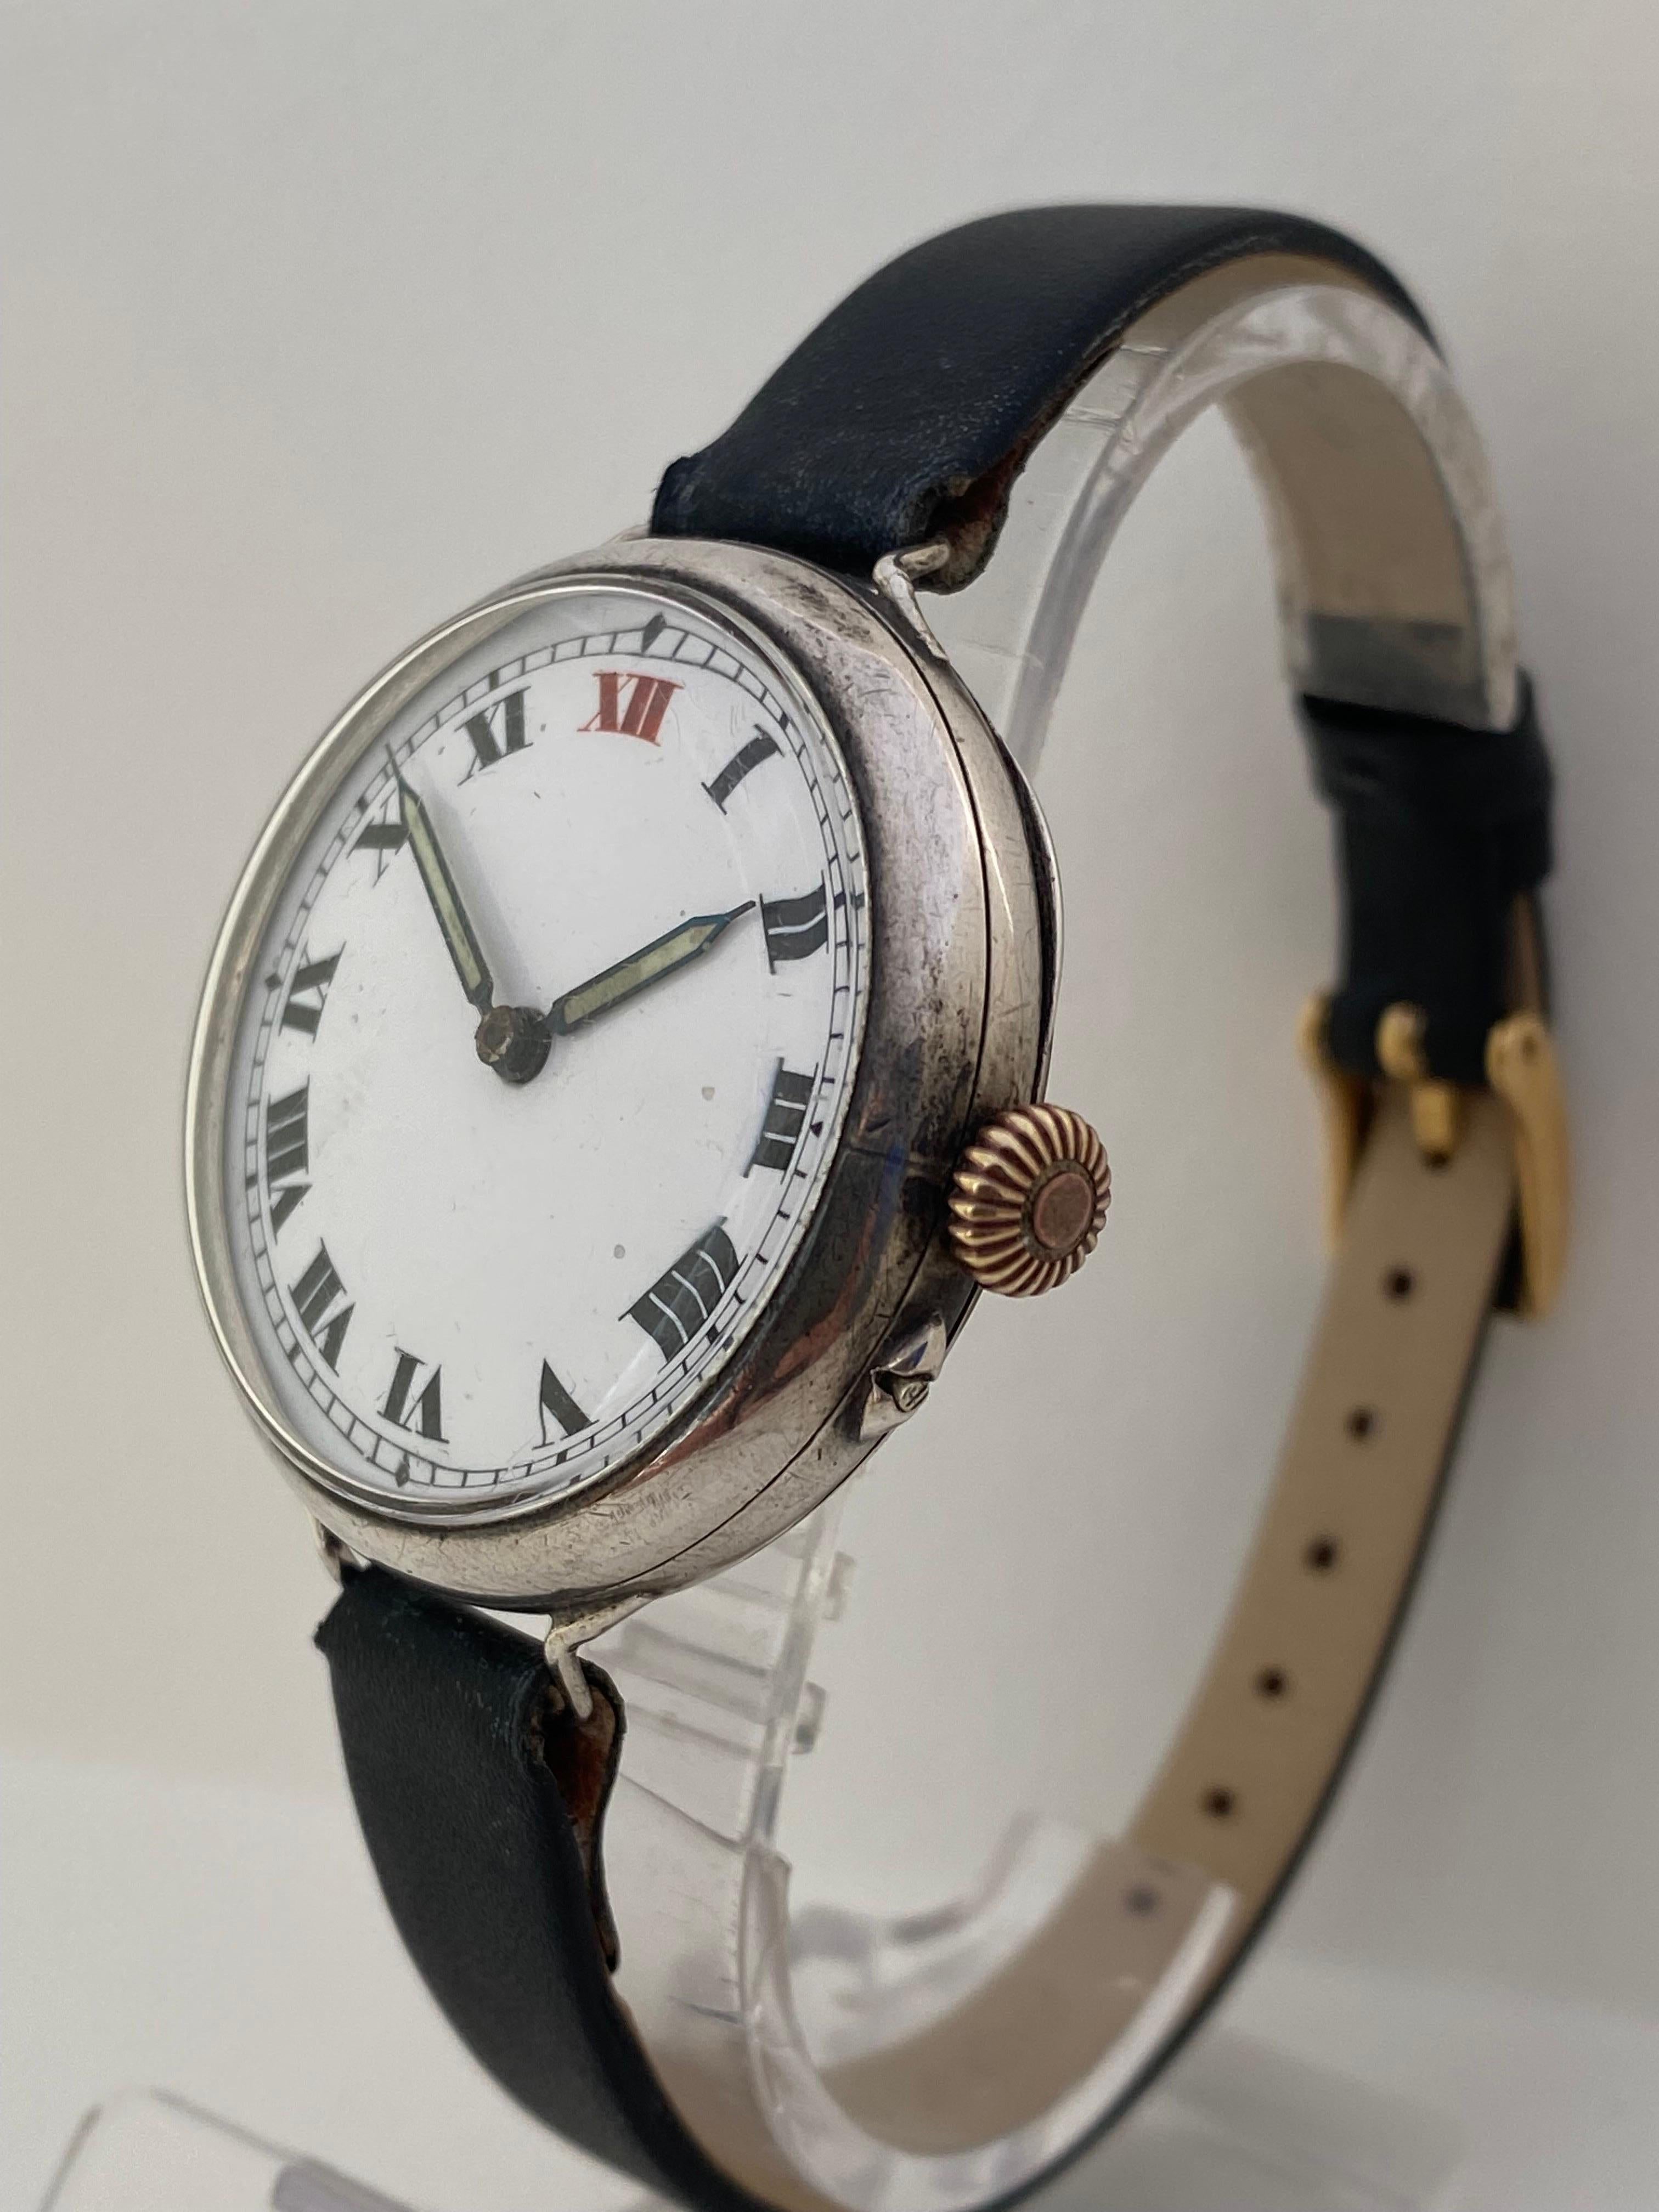 This Beautiful 35mm diameter(excluding winder) mechanical silver trench watch is in good working condition and it is running well. Visible signs of ageing and wear with tiny and light marks on the case surface as shown. The black leather strap